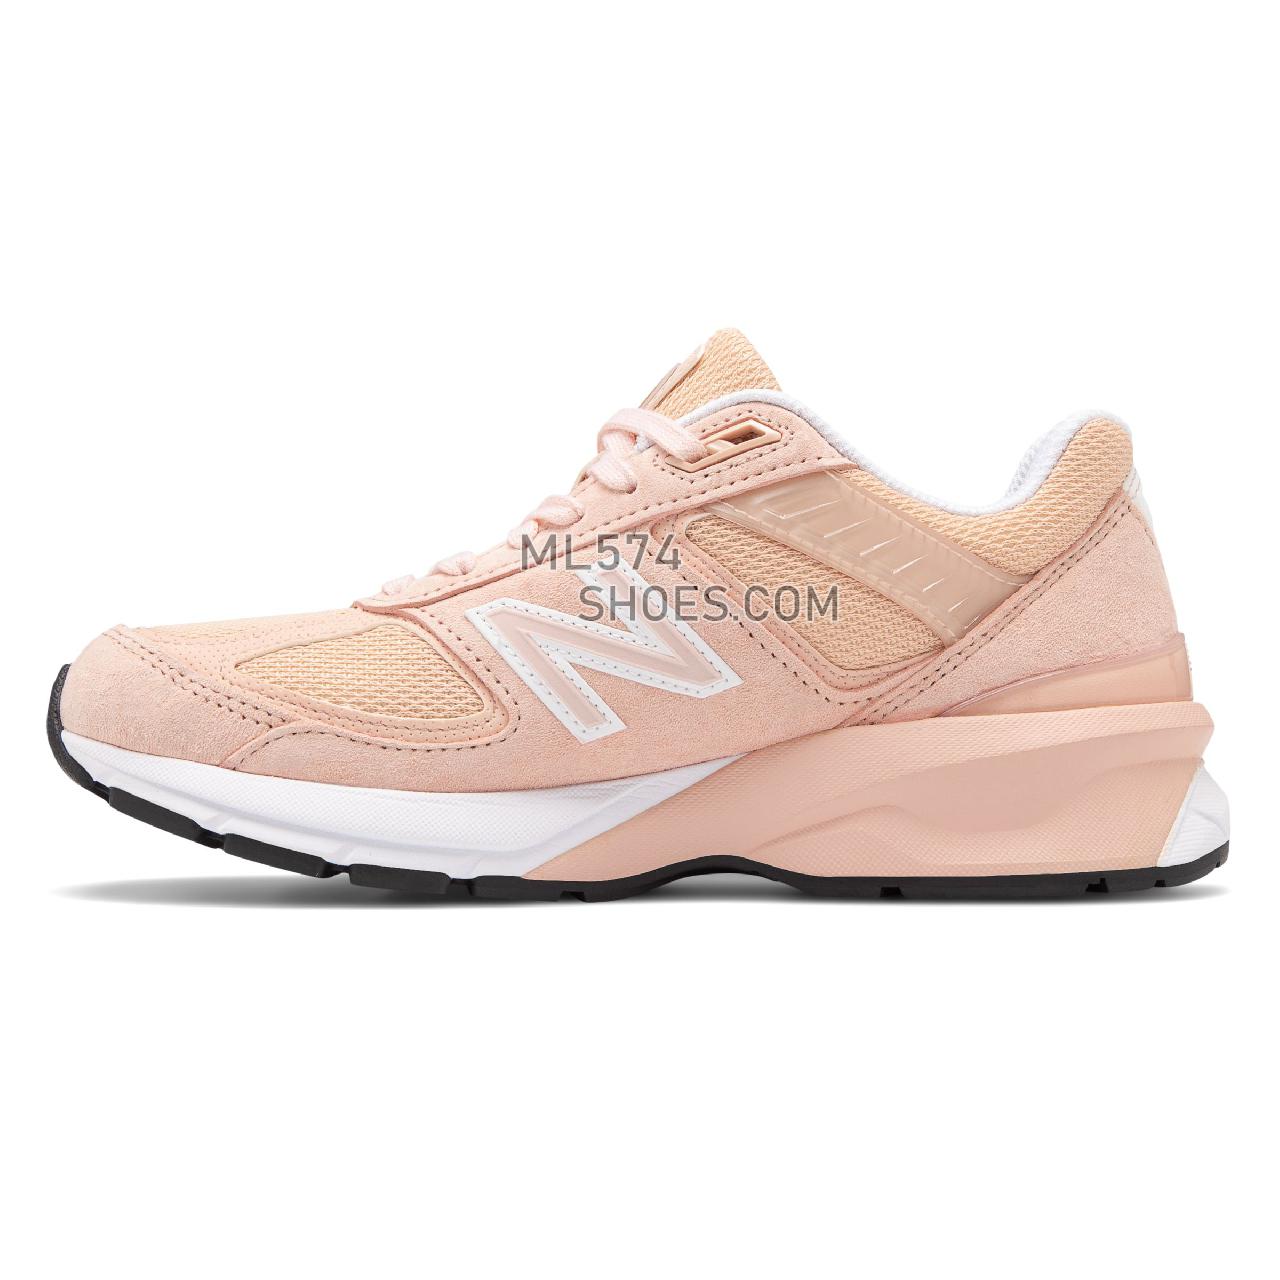 New Balance 990v5 Made in US - Women's Neutral Running - Pink with White - W990PK5